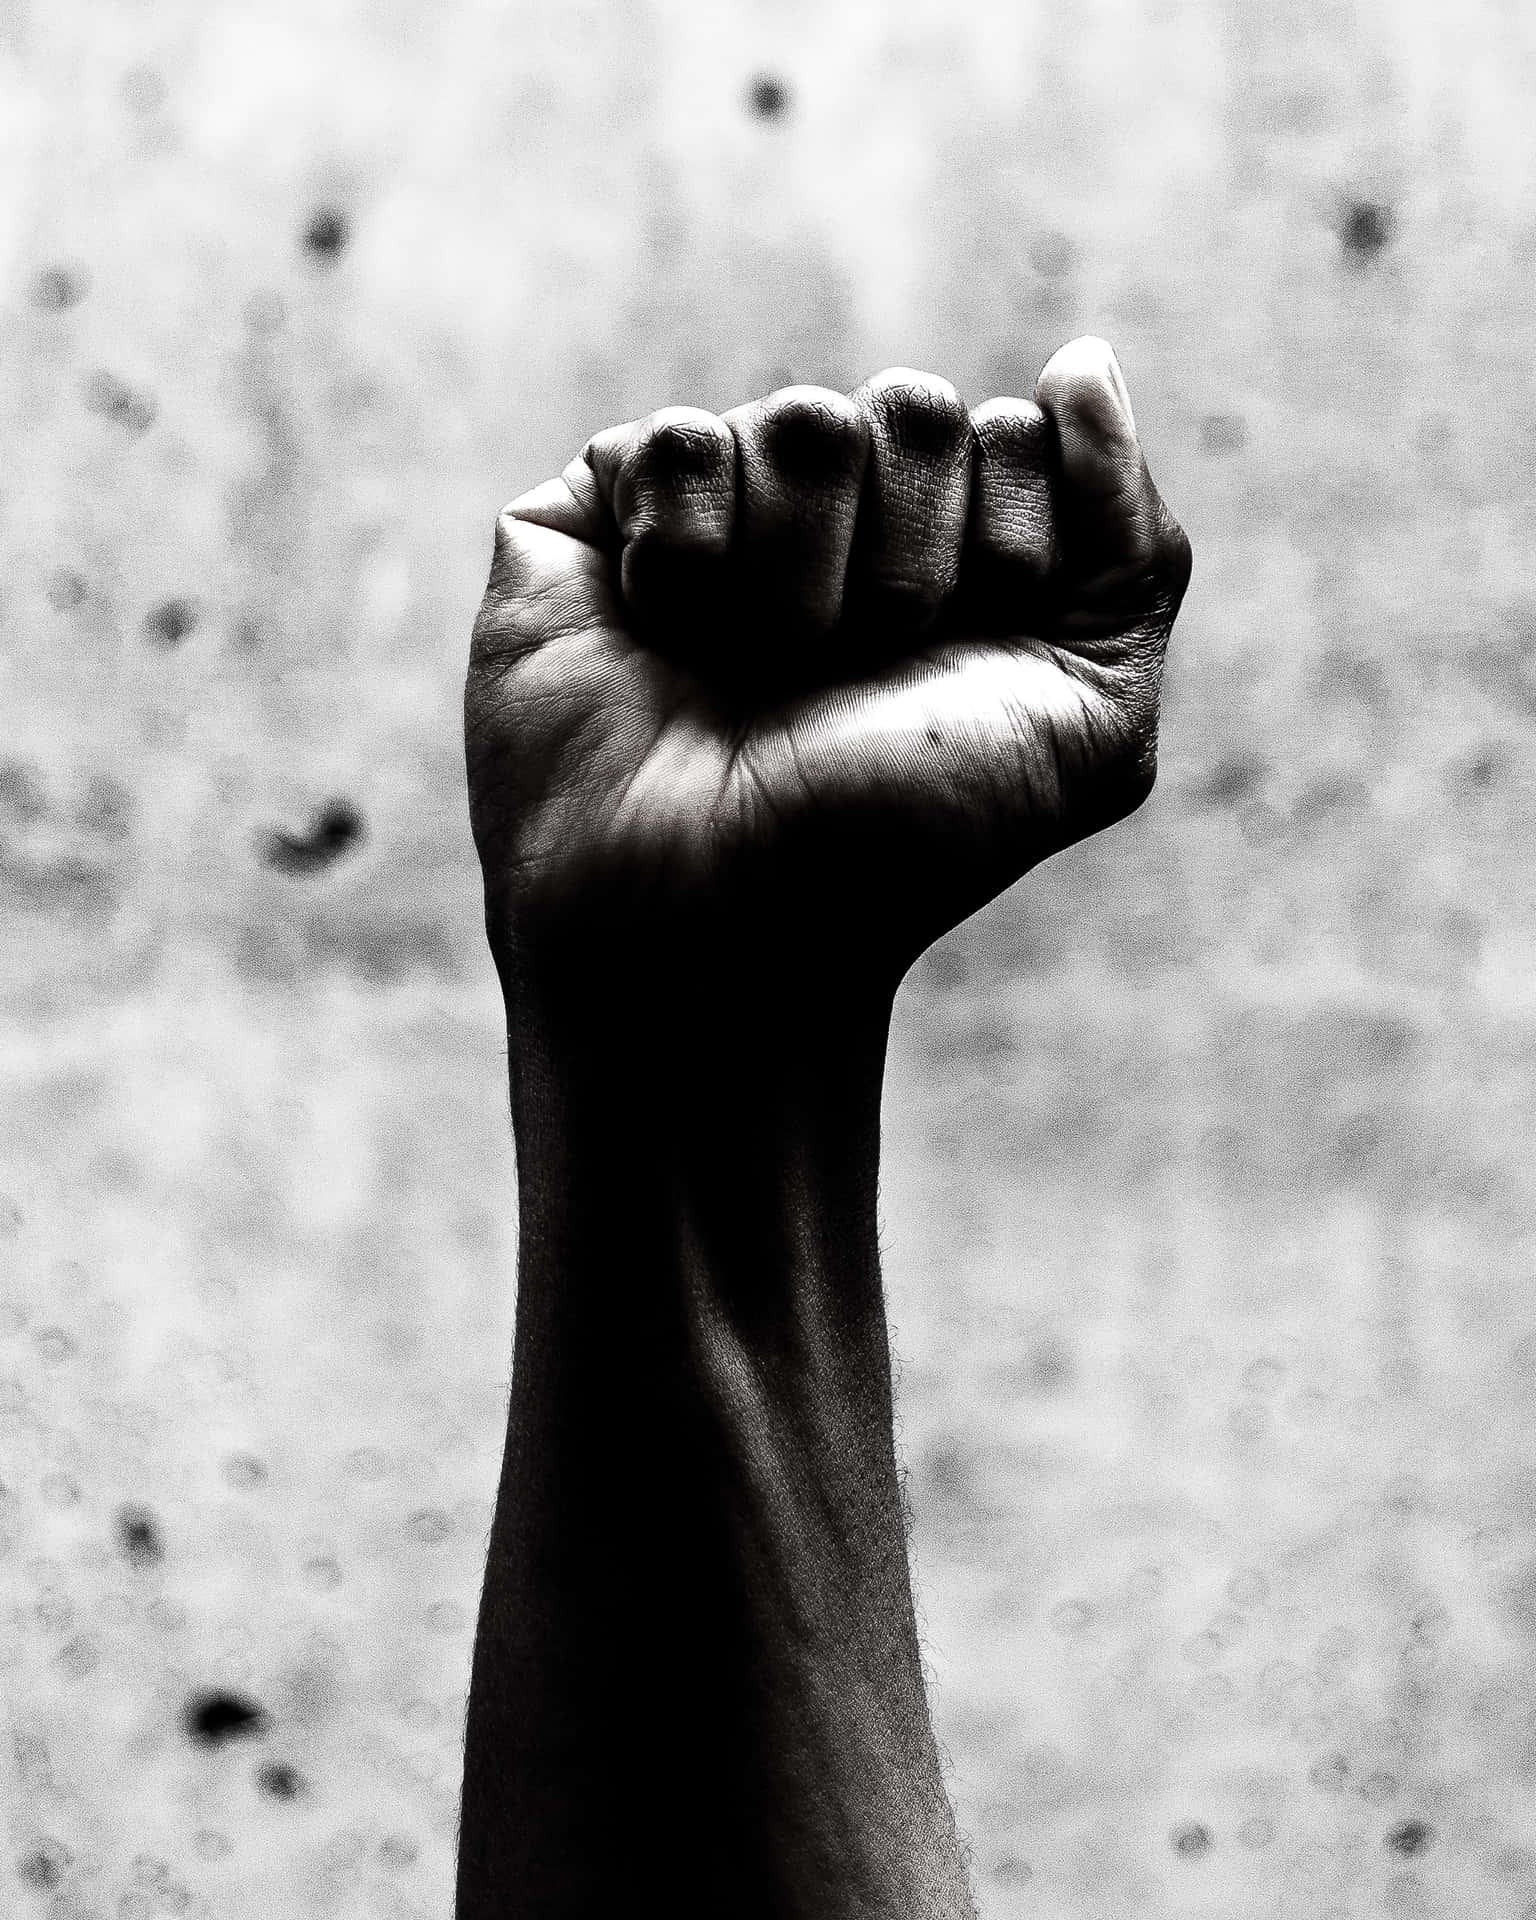 Clenched Fist Against Racism Wallpaper